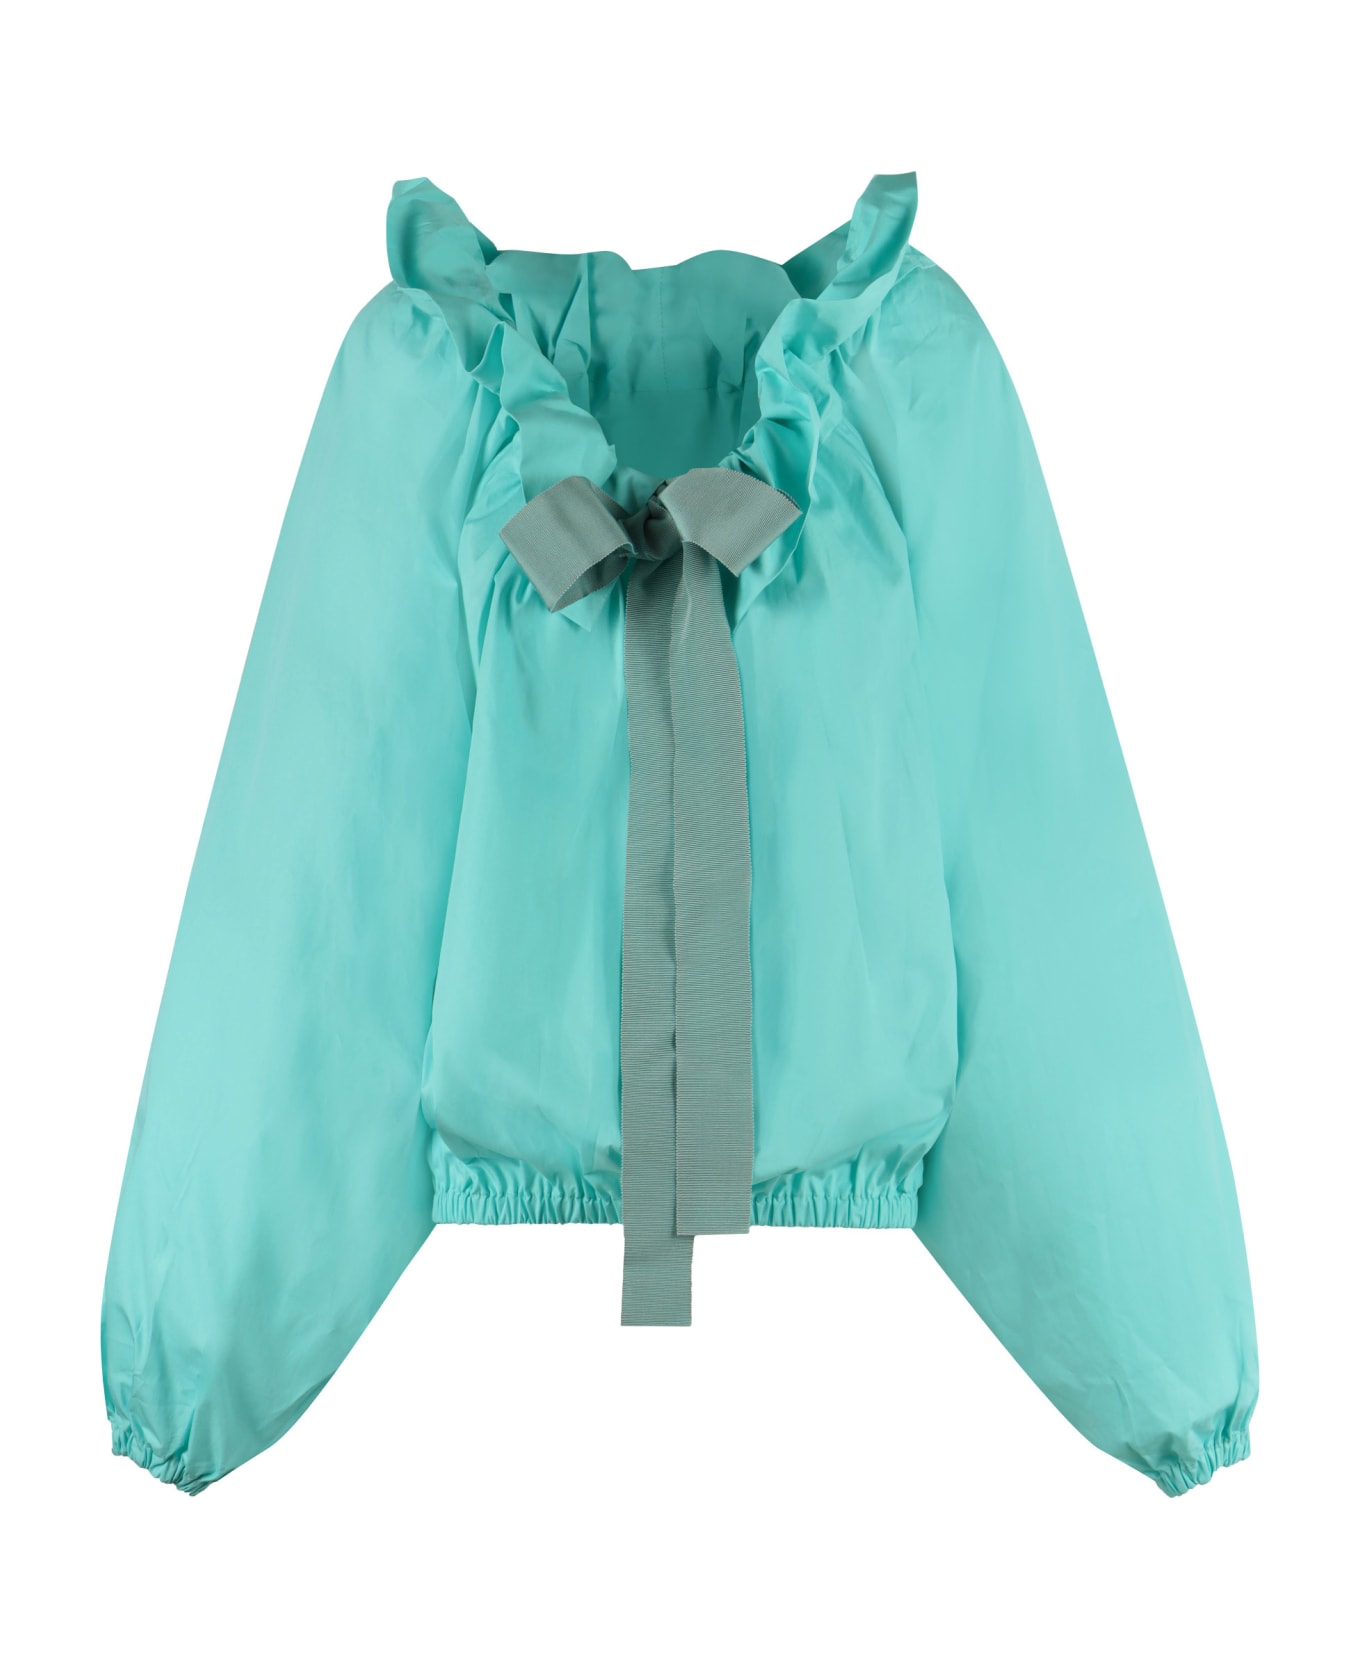 Patou Ruffled Top - Verde ブラウス